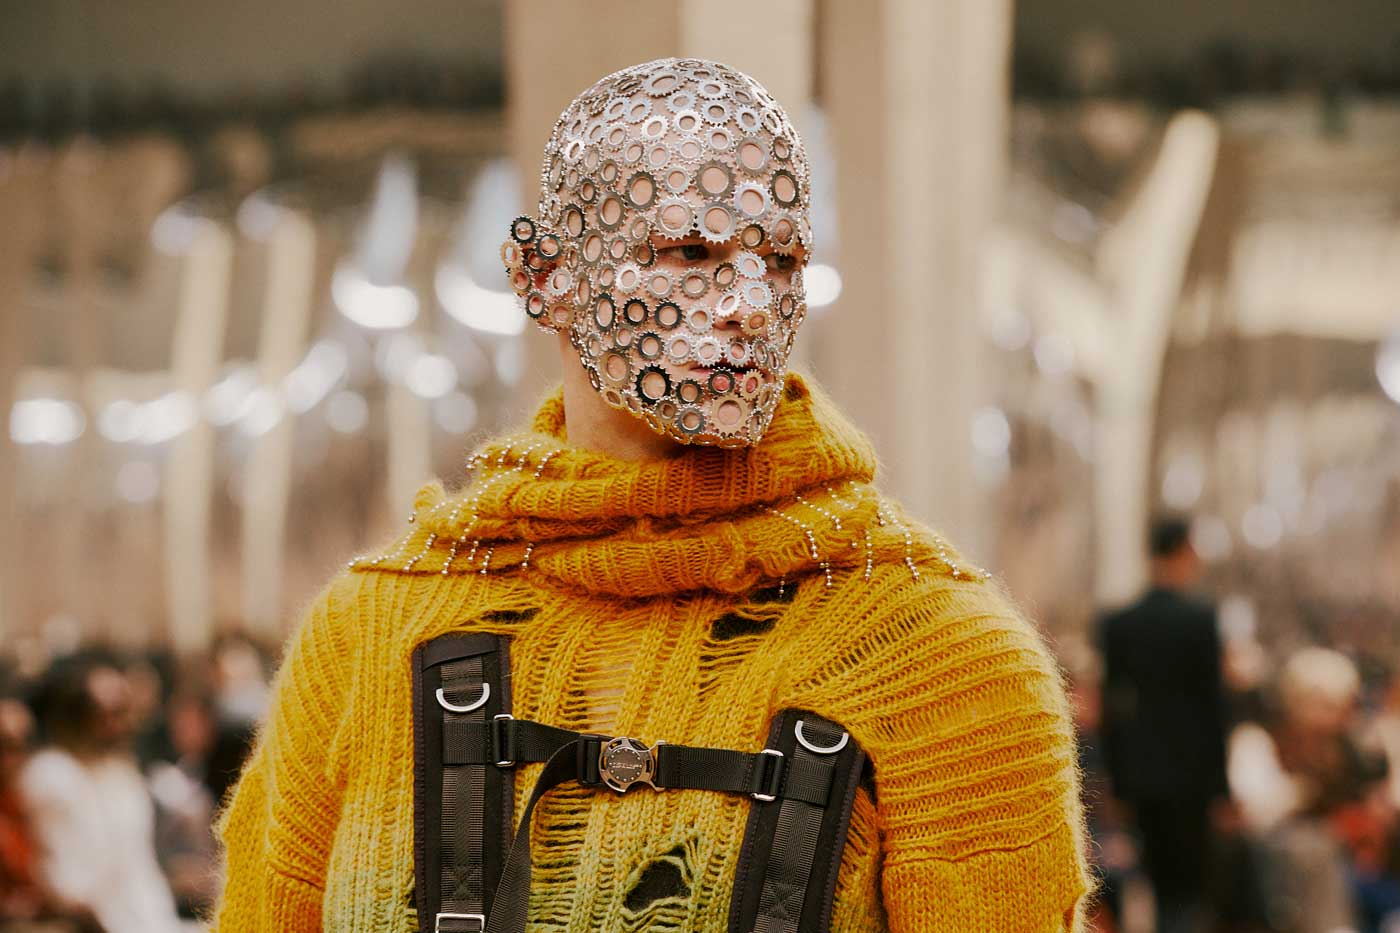 Louis Vuitton Resort 2019: Sneaker Boots, Mask-like Sunnies and a